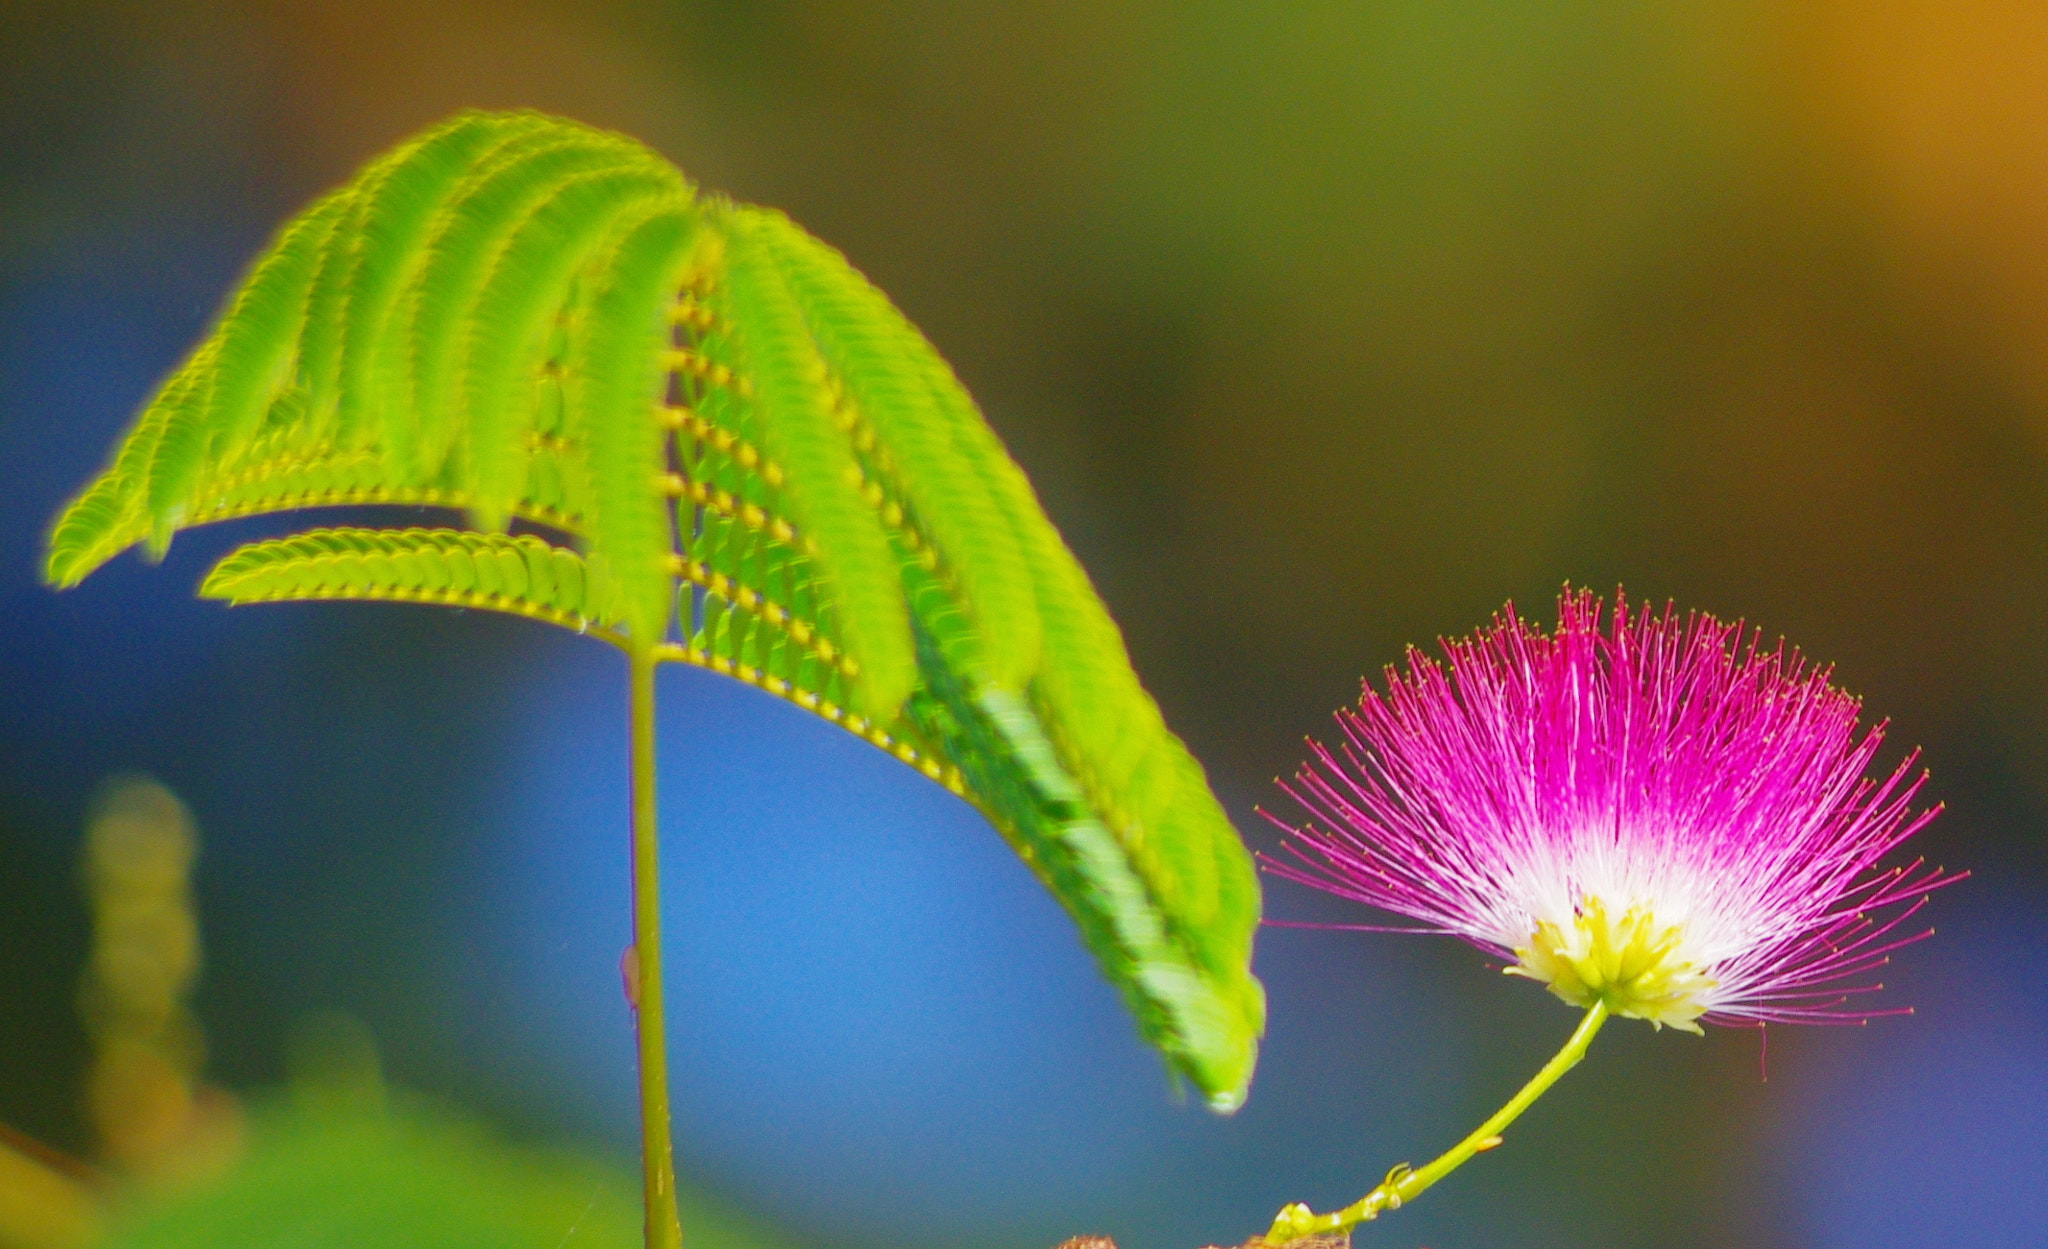 Pentax K-5 sample photo. Mimosa tree - bright blossom and leaf photography